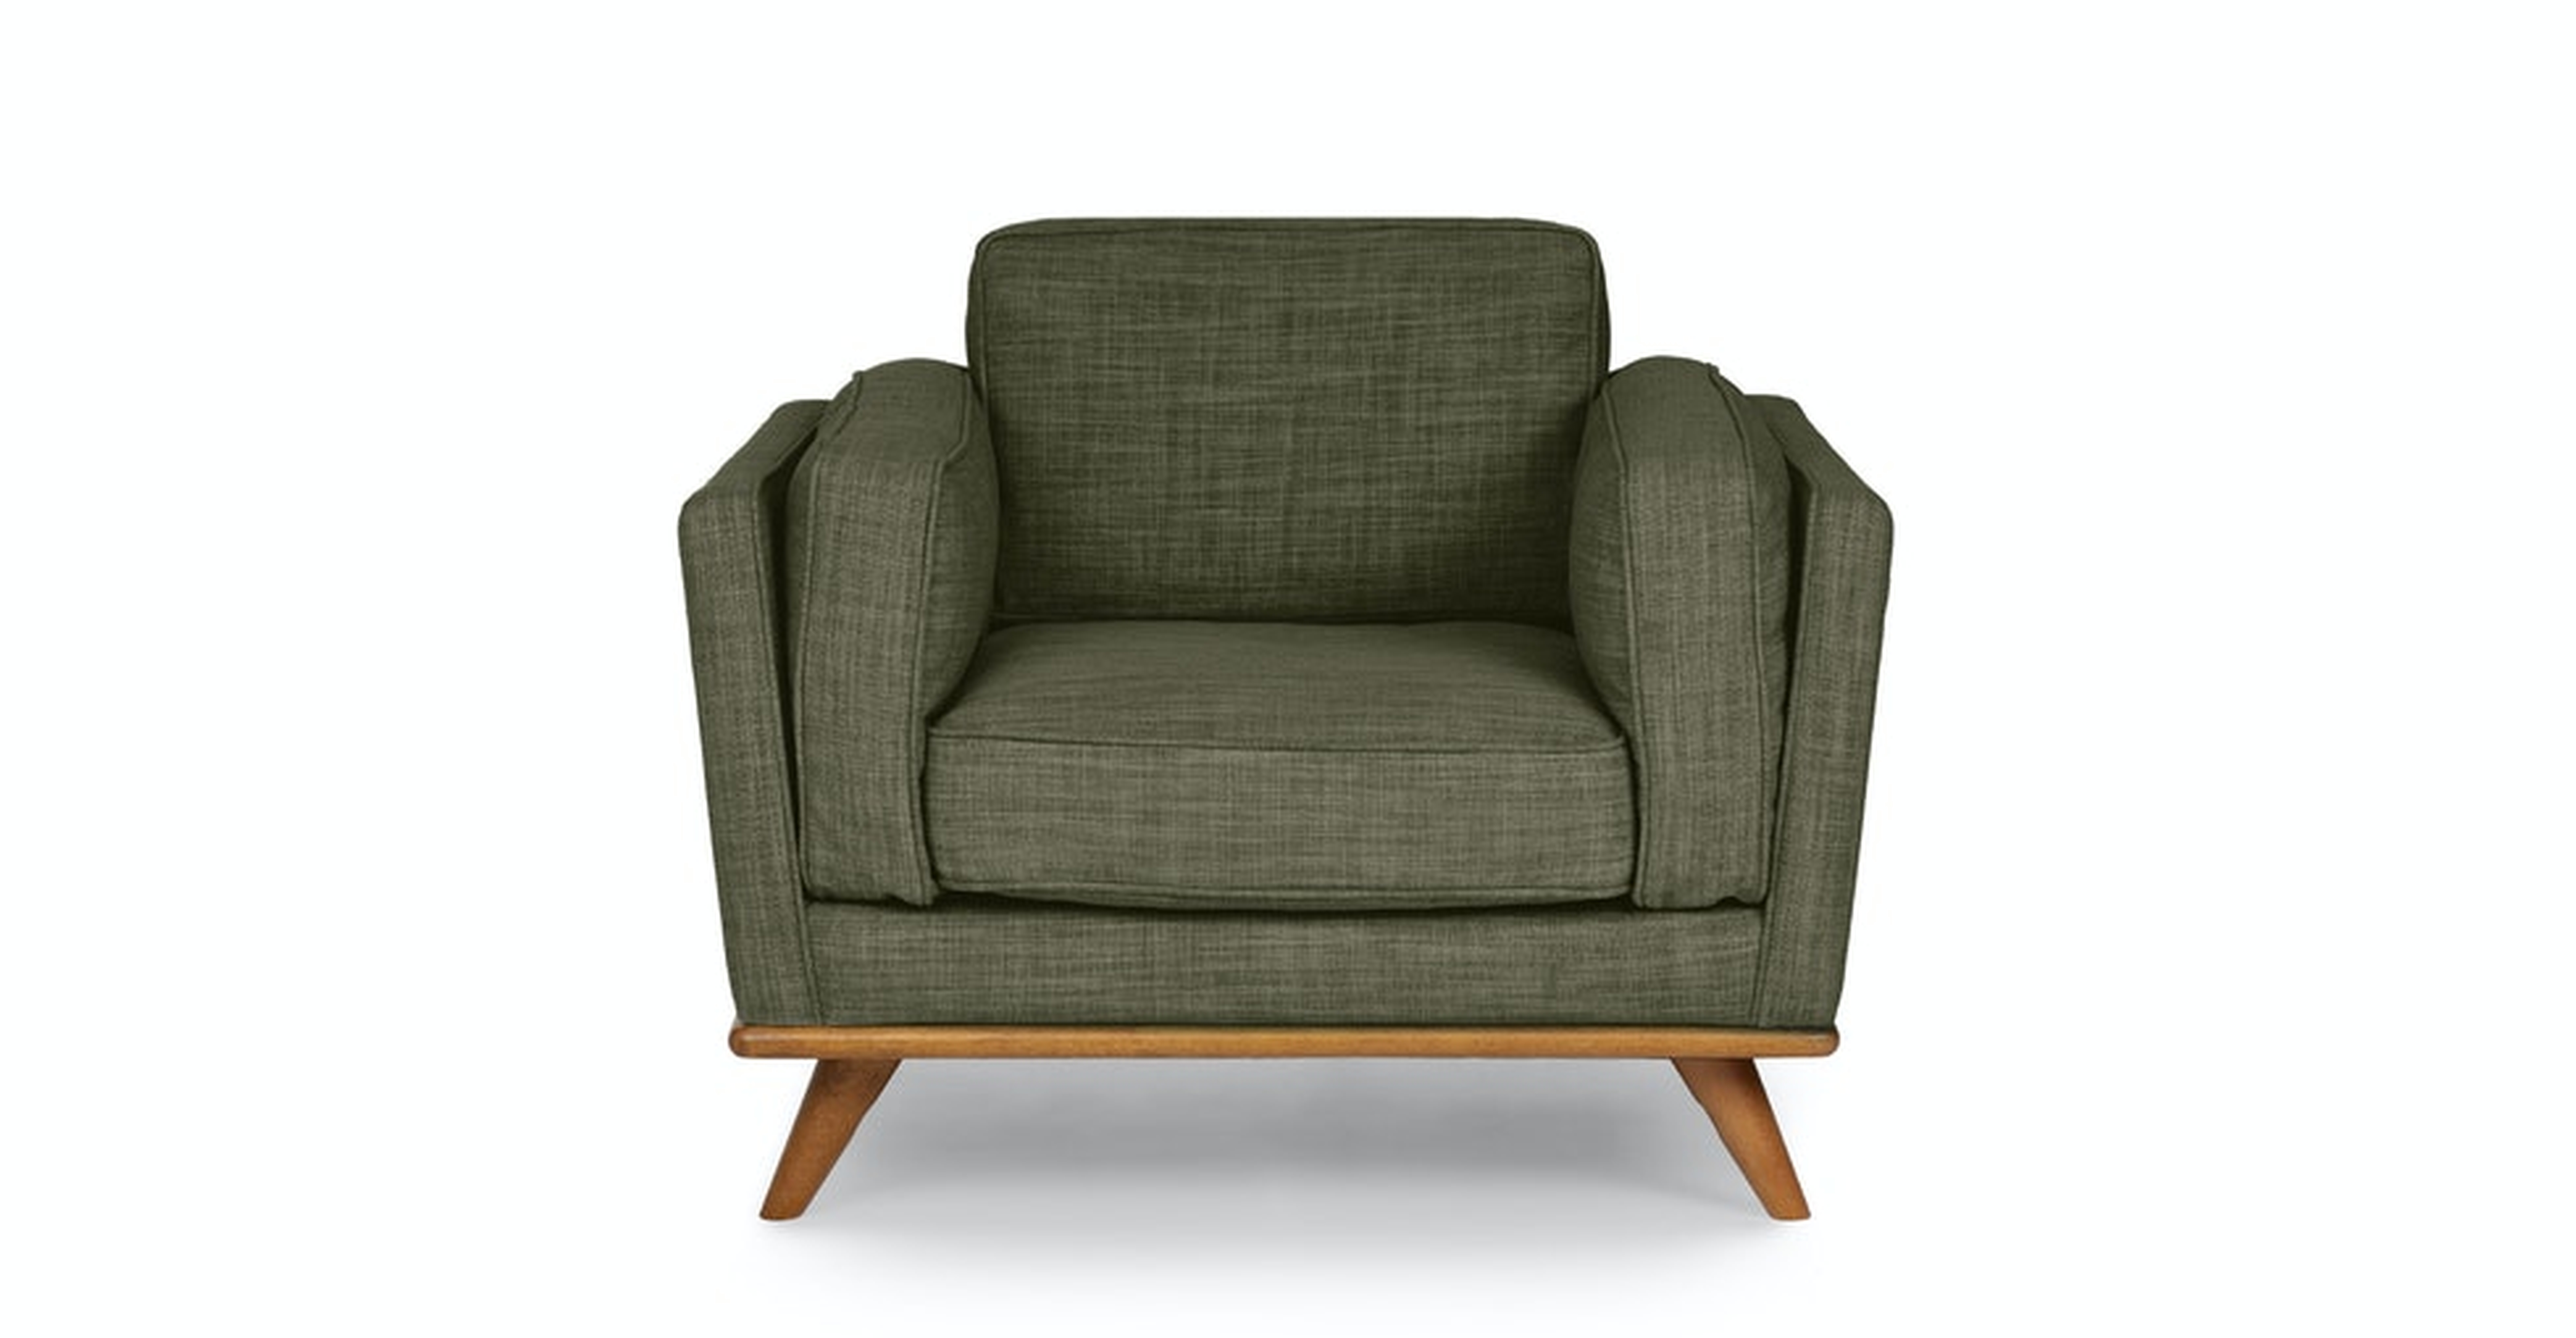 Timber Olio Green Chair - Article